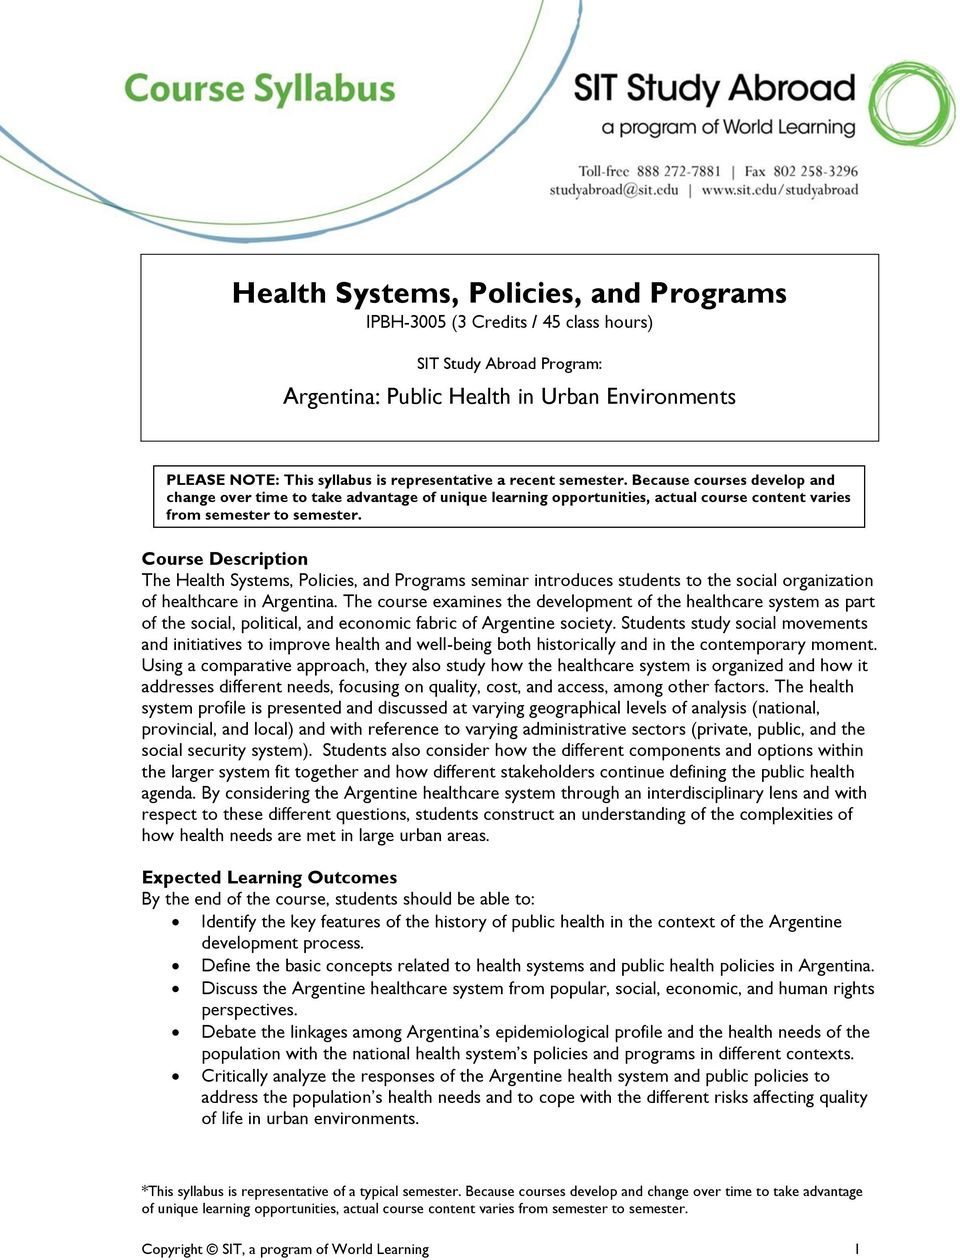 Course Description The Health Systems, Policies, and Programs seminar introduces students to the social organization of healthcare in Argentina.